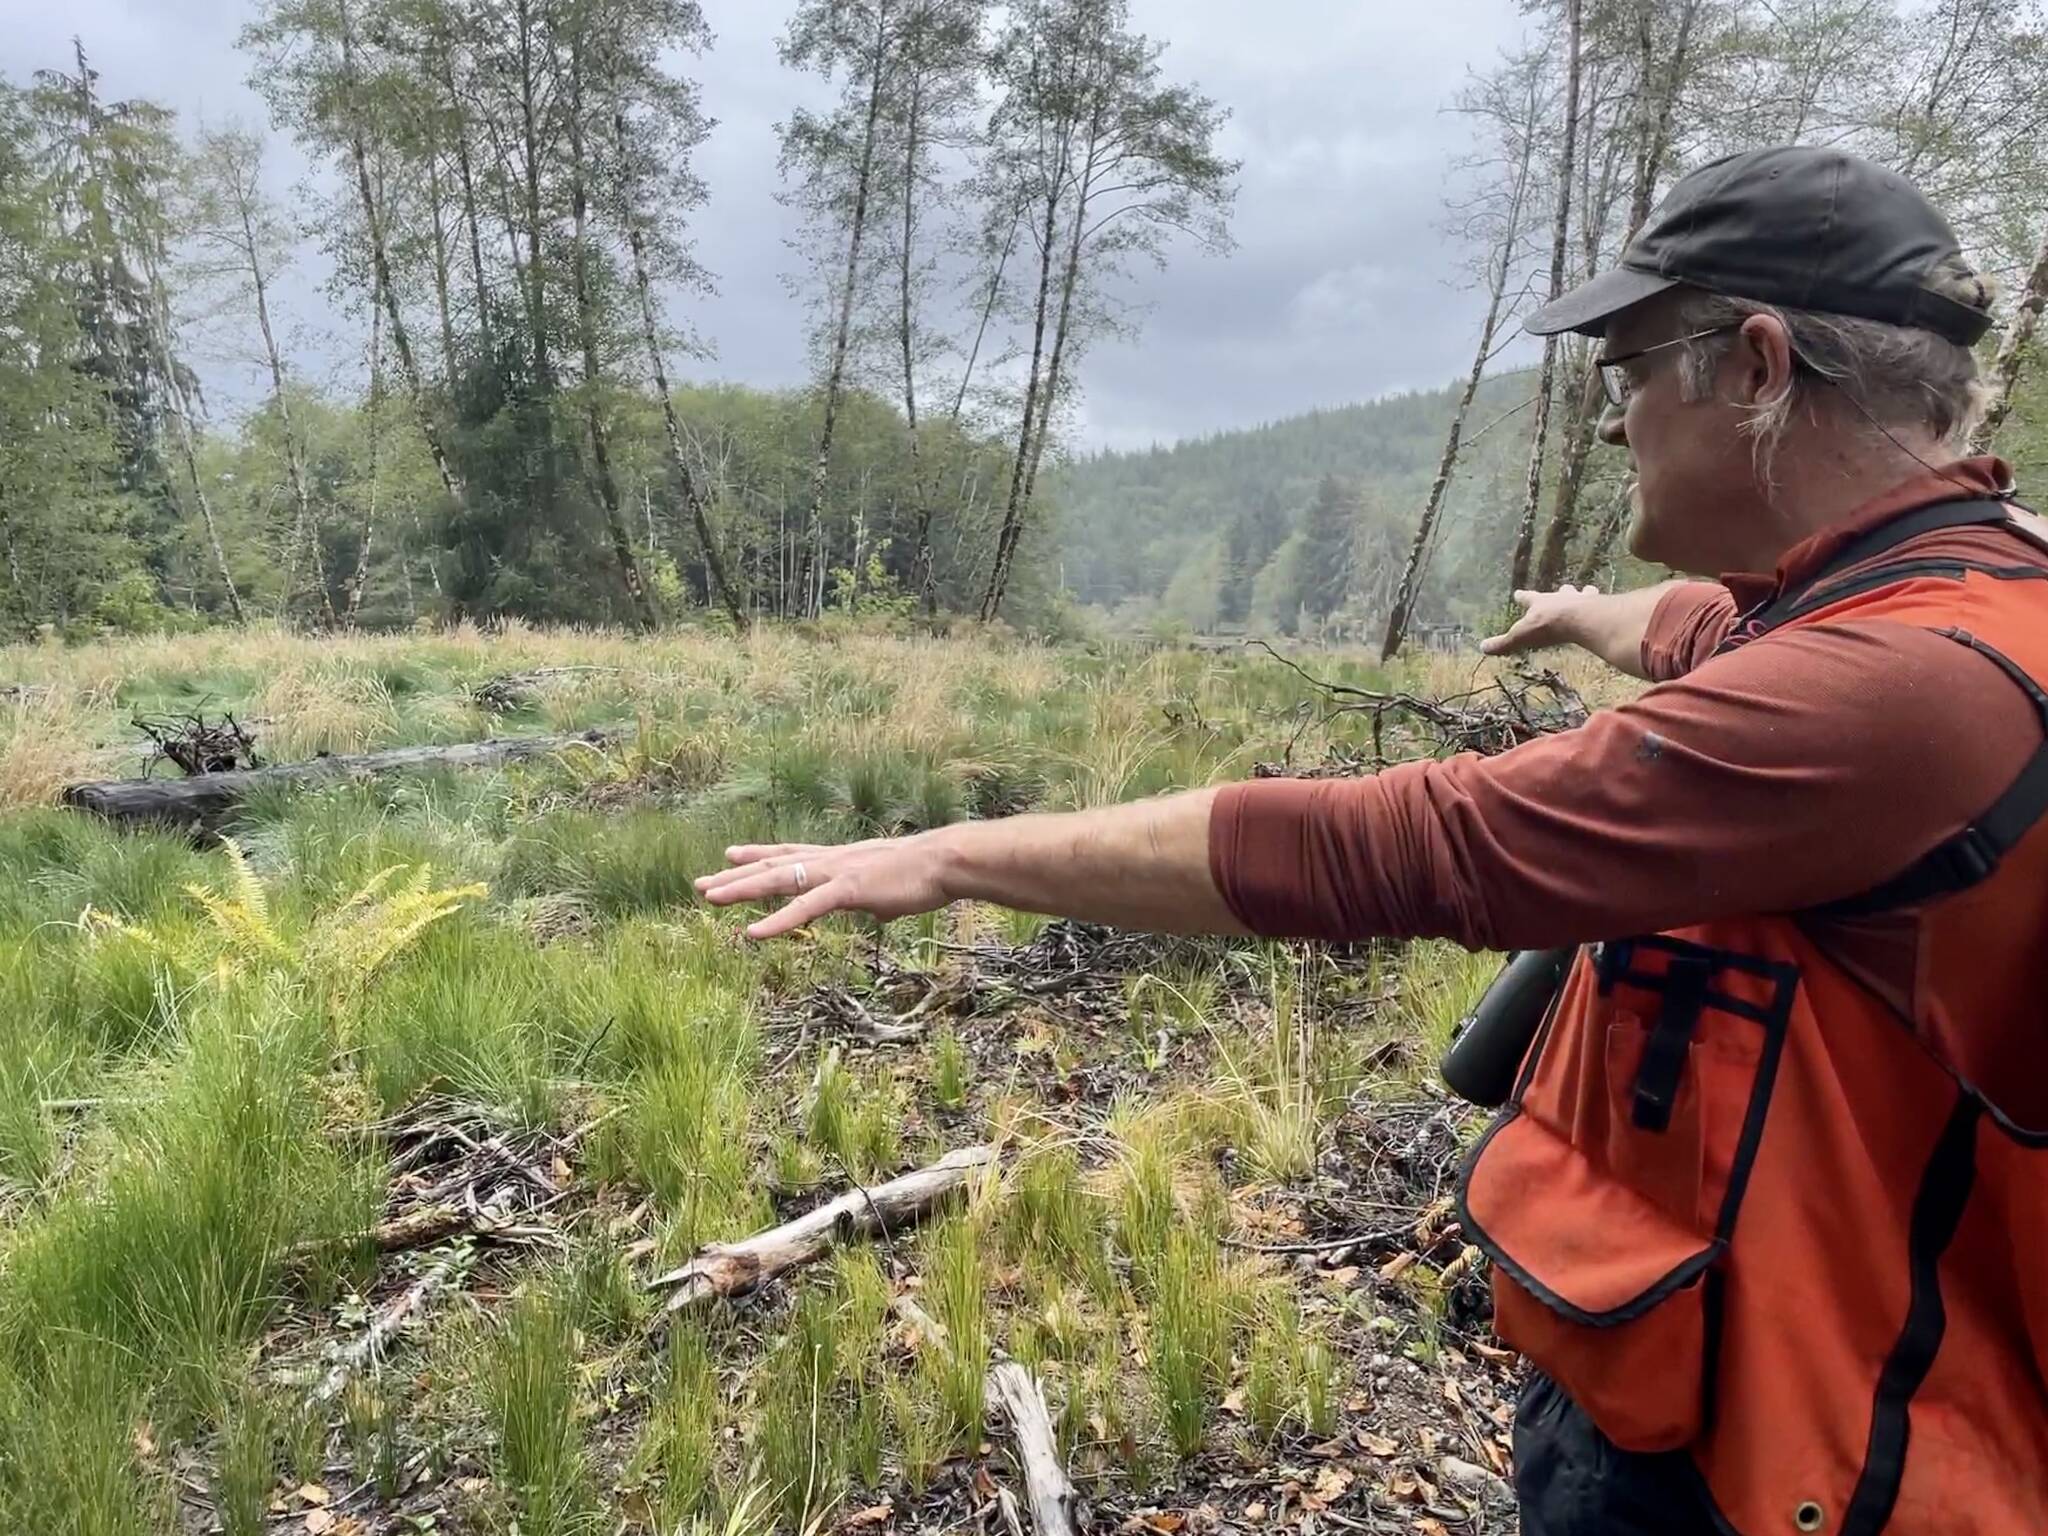 Michael S. Lockett / The Daily World 
Tom Kollasch, watershed restoration program manager for the Grays Harbor Conservation District, points to the new growth that’s occurred since the work done to clear the blockage and open up the waterway to the Hoquiam River.